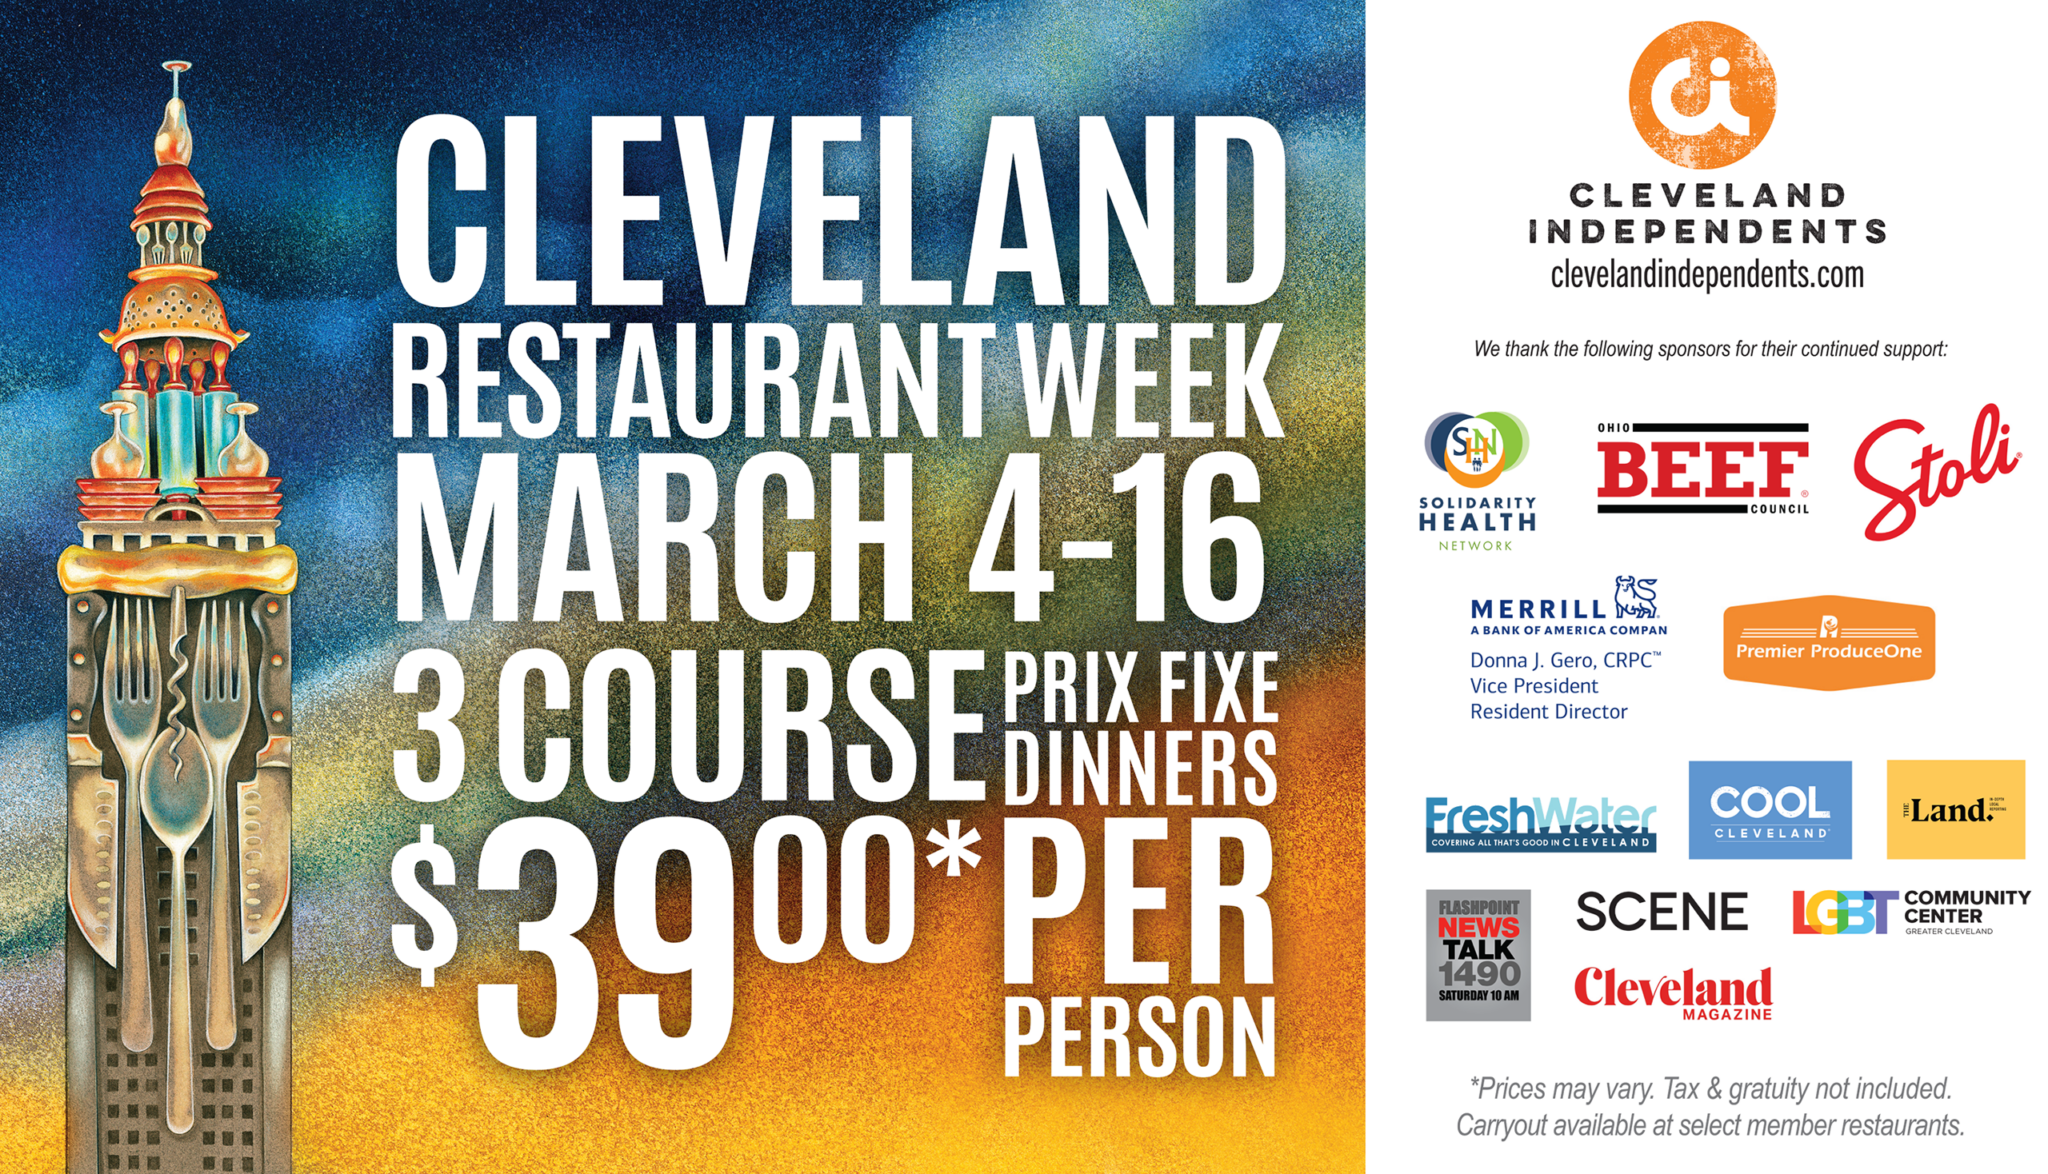 Cleveland Restaurant Week - March 4-16 - 3 Course Prix Fixe Dinners - $39 per person